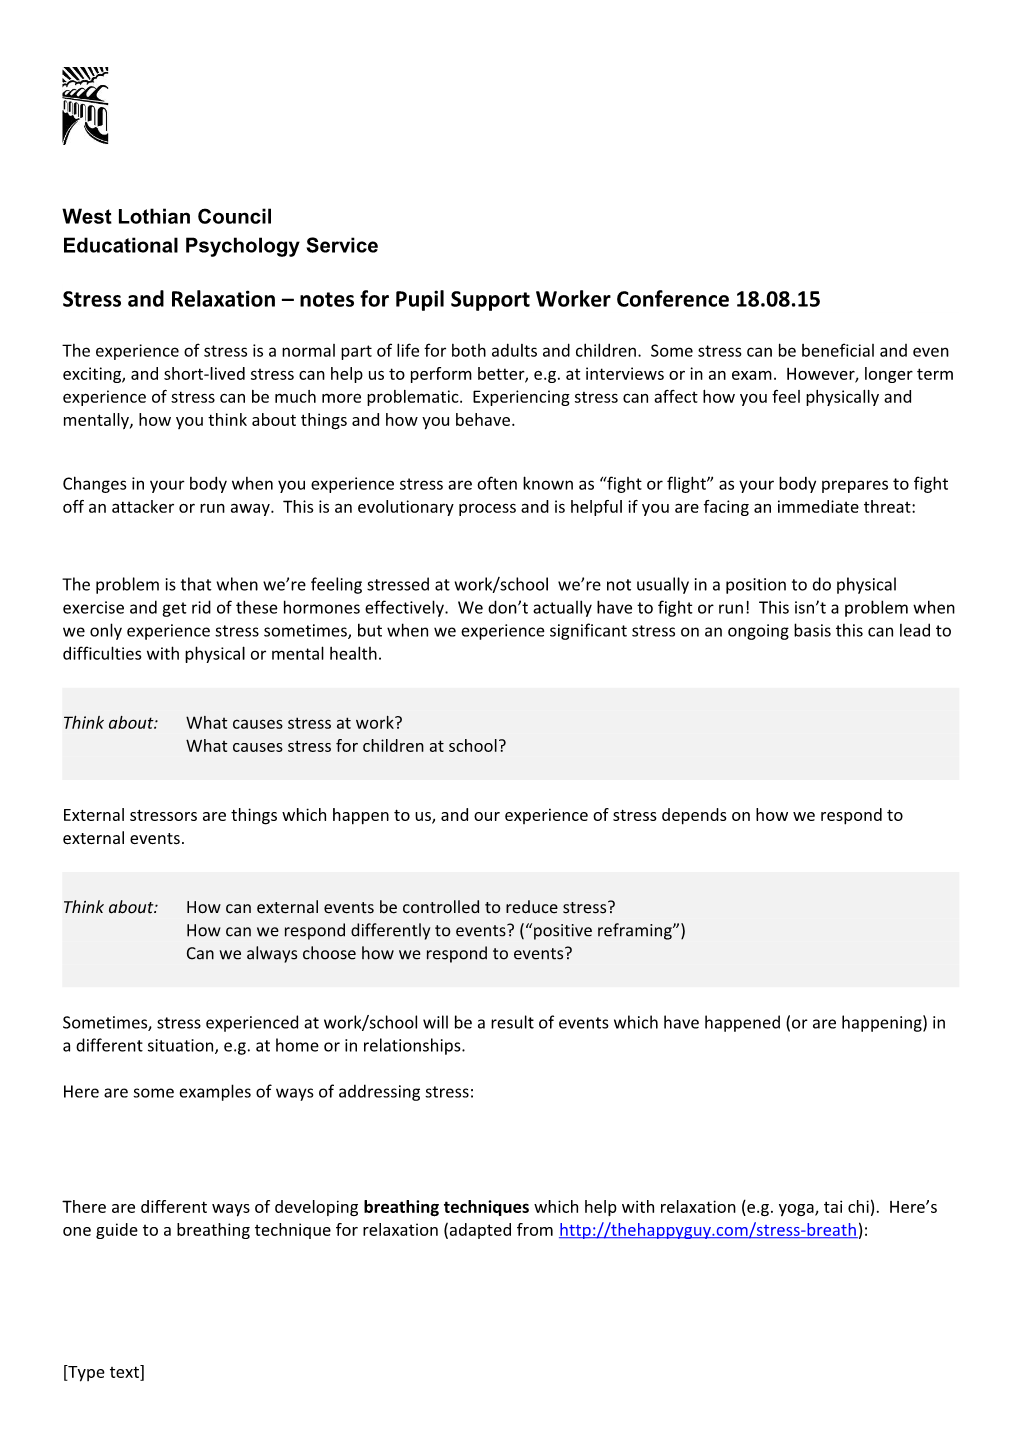 Stress and Relaxation Notes for Pupil Support Worker Conference 18.08.15